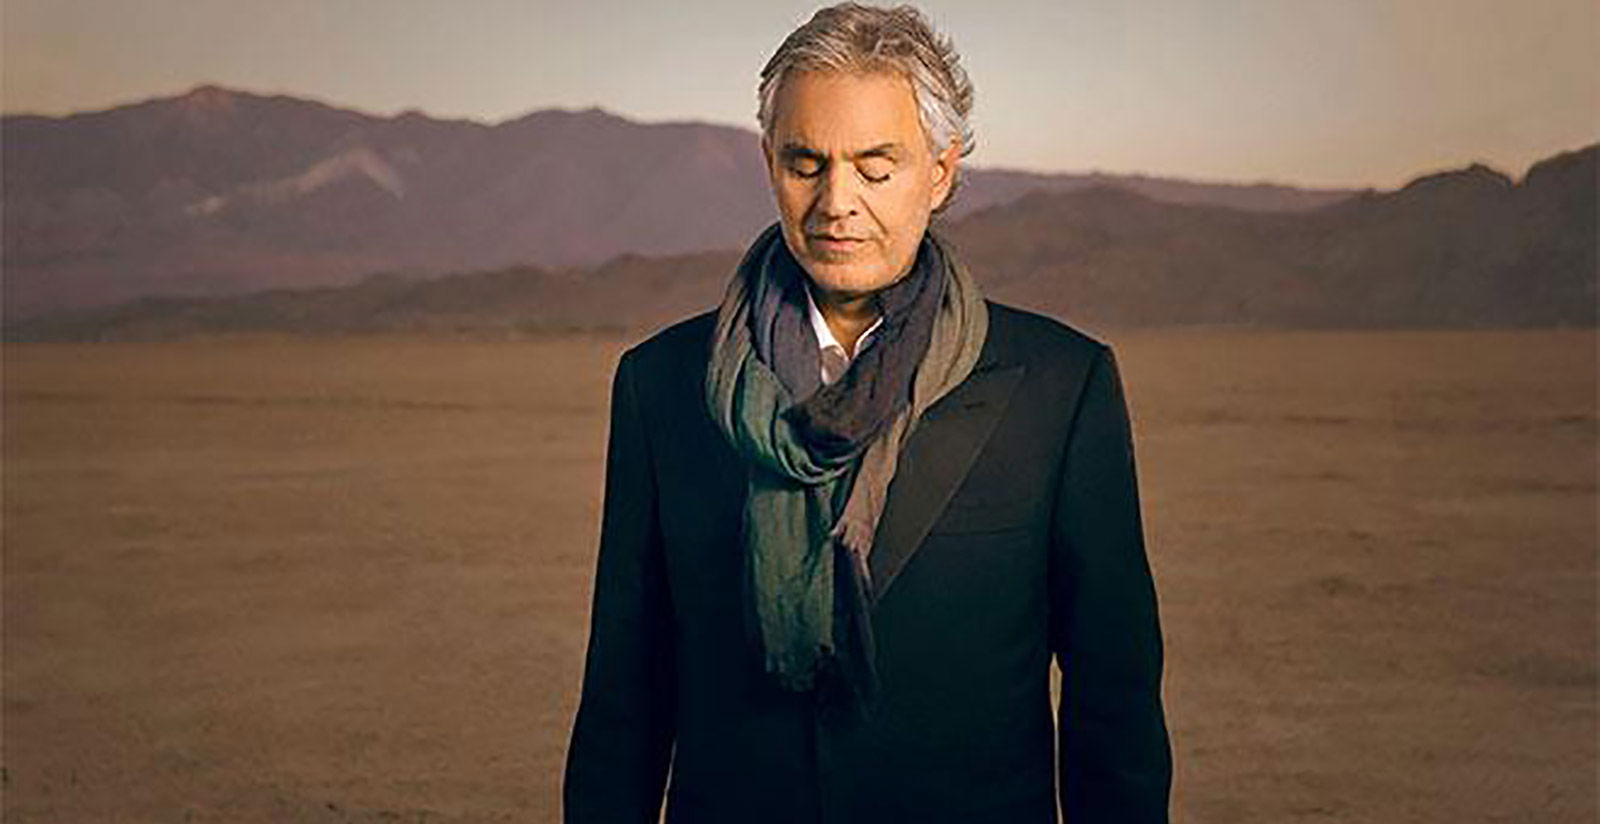 Andrea Bocelli’s Concert for this 30th year career anniversary 1